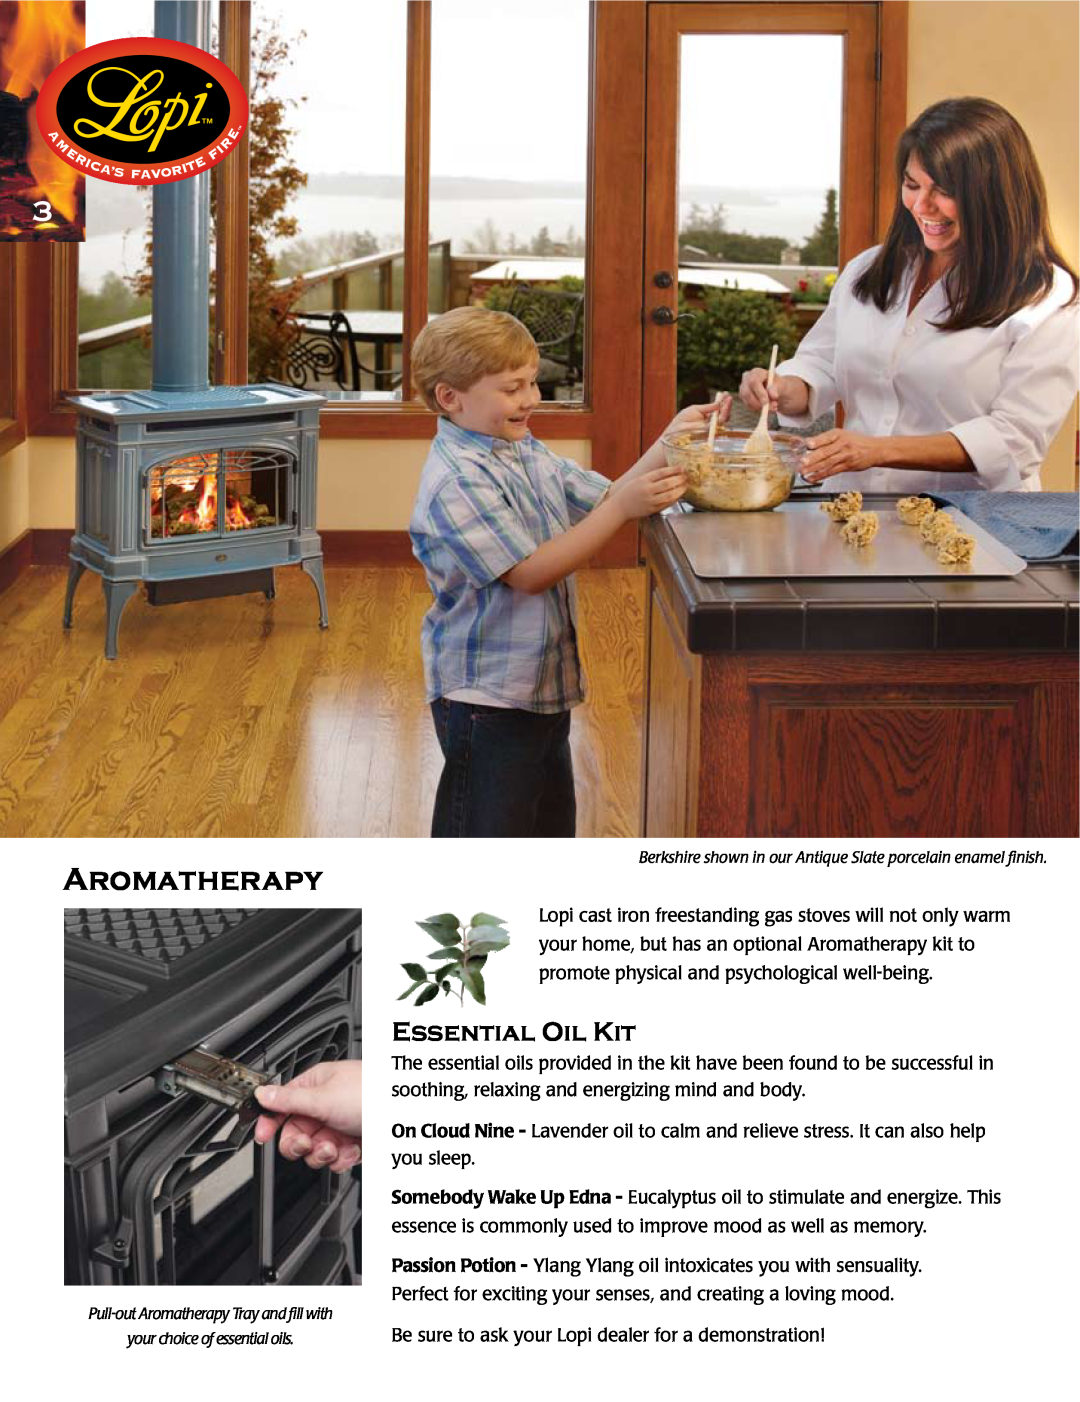 Lopi Gas Stove And Fireplace manual Aromatherapy, Essential Oil Kit 